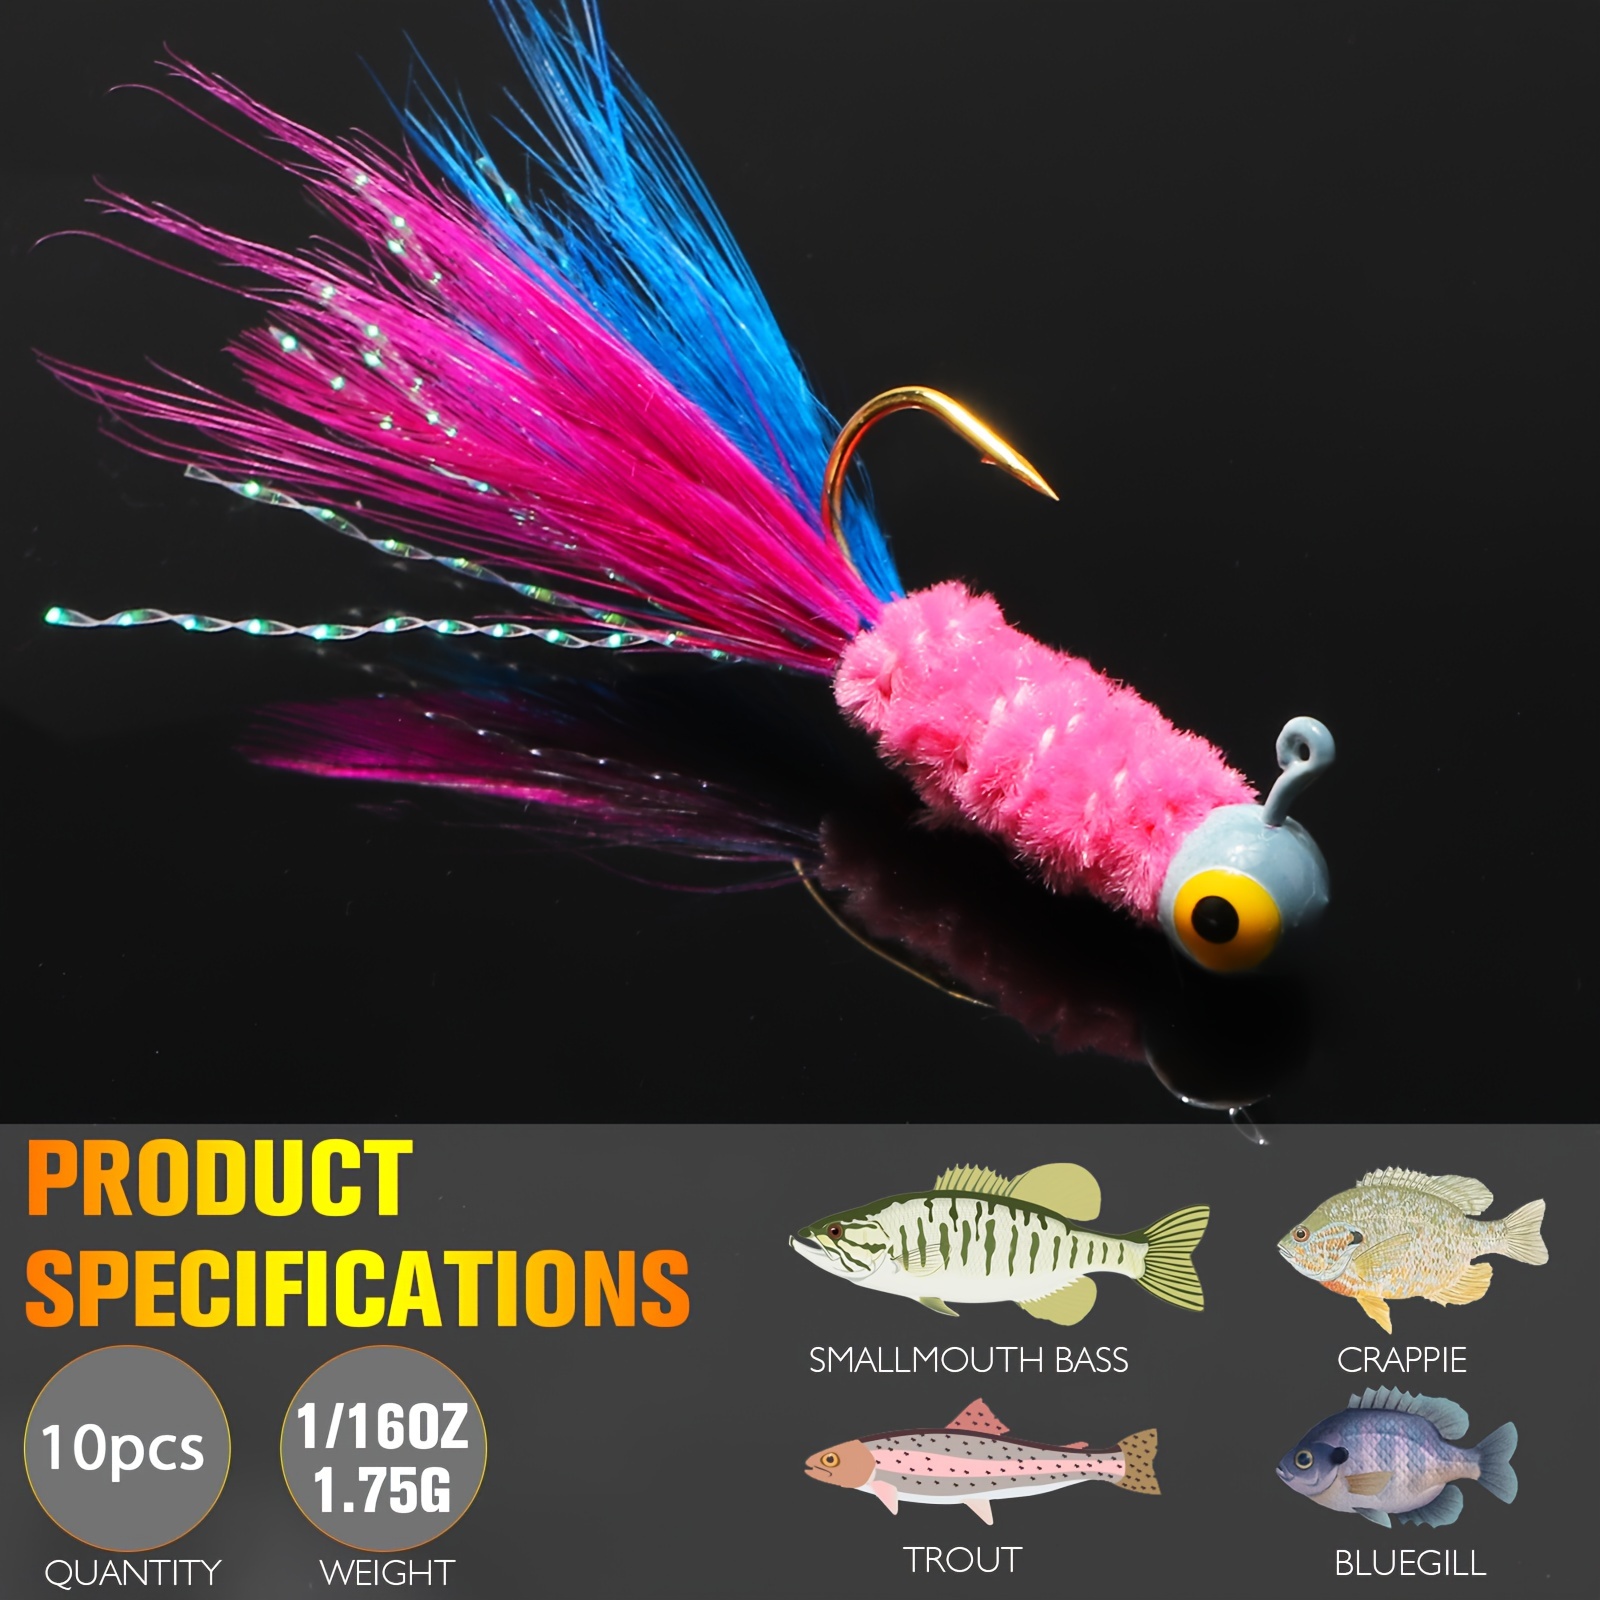 * 10pcs 0.8/1.75g (0.03/0.06oz ) Crappie Jigs, Jig Heads Fishing Bait With  Feather For Ice Or Fly Fishing, Fishing Hair Jigs For Panfish Sunfish